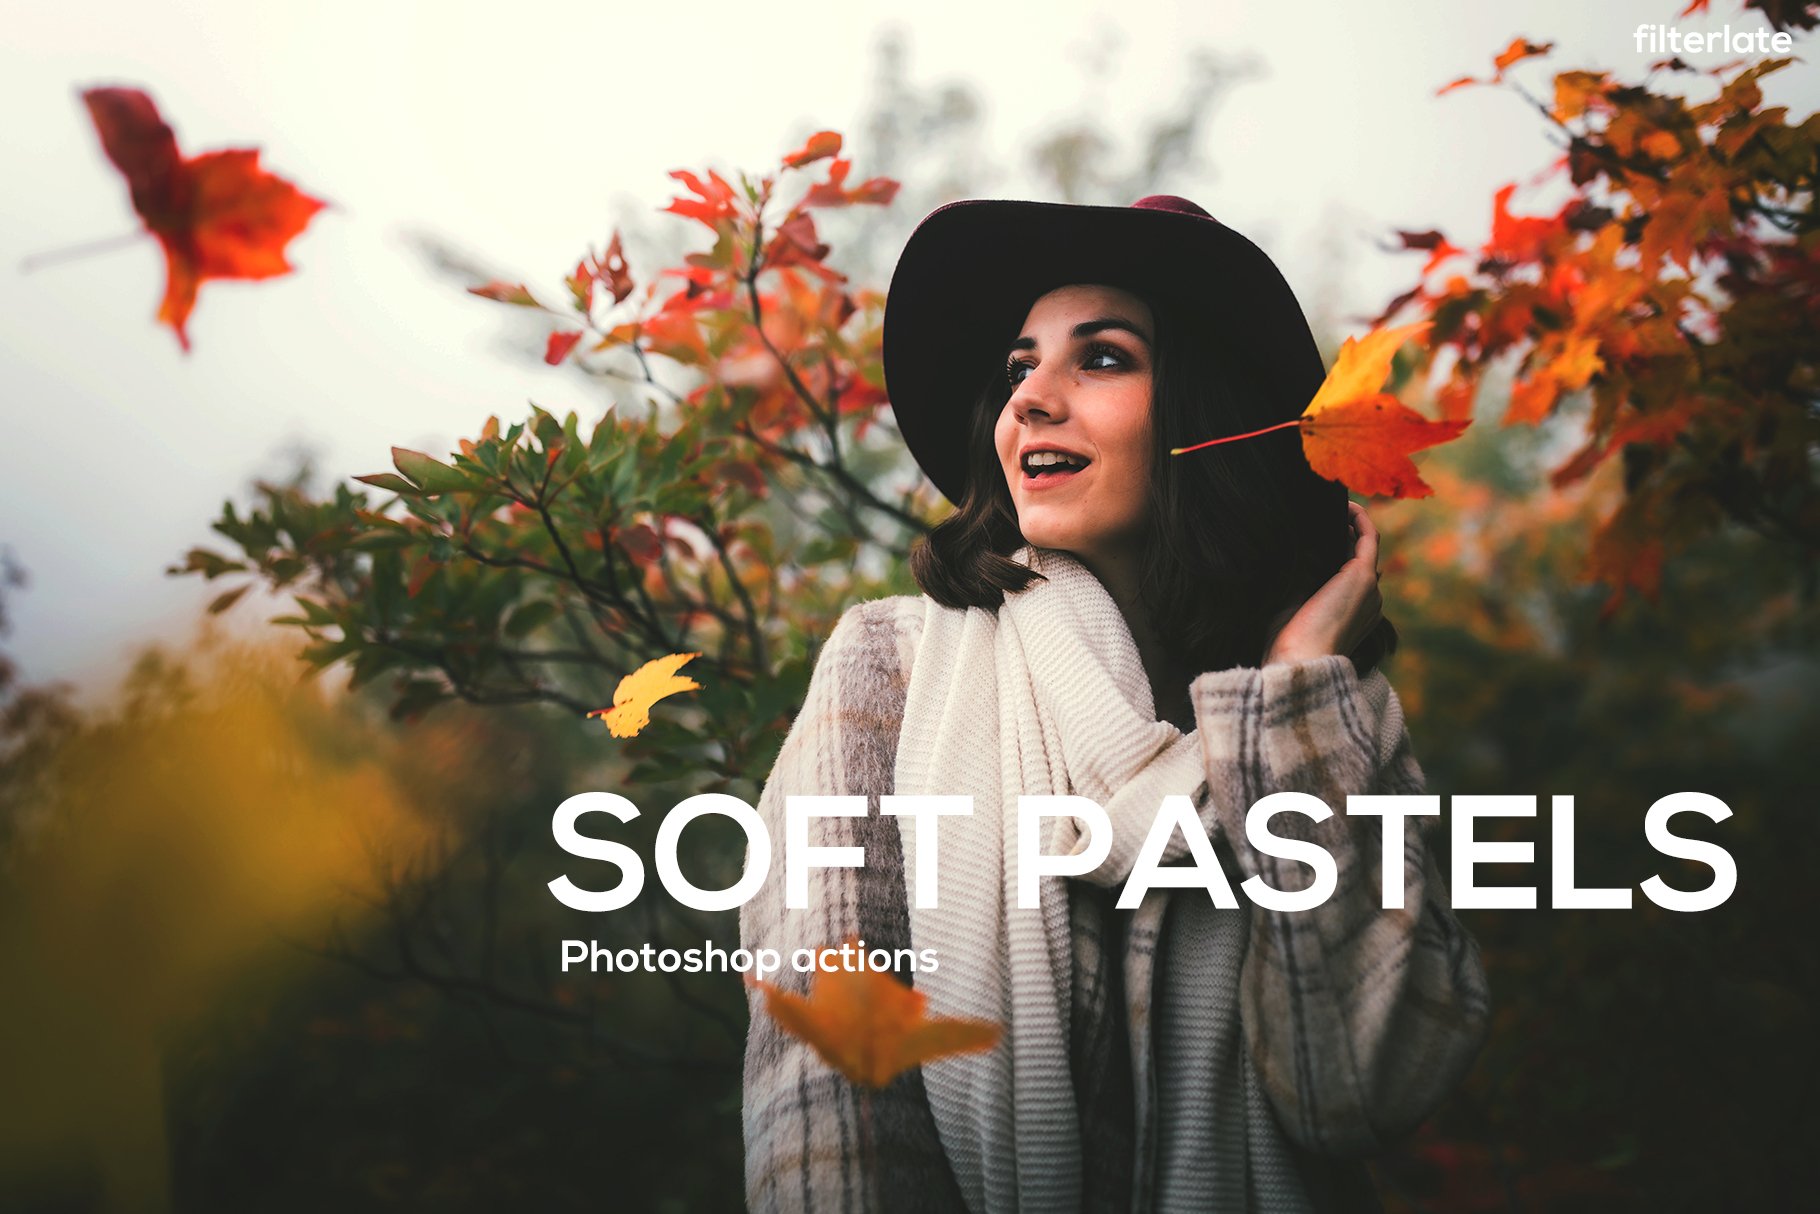 Soft | Photoshop Actionscover image.